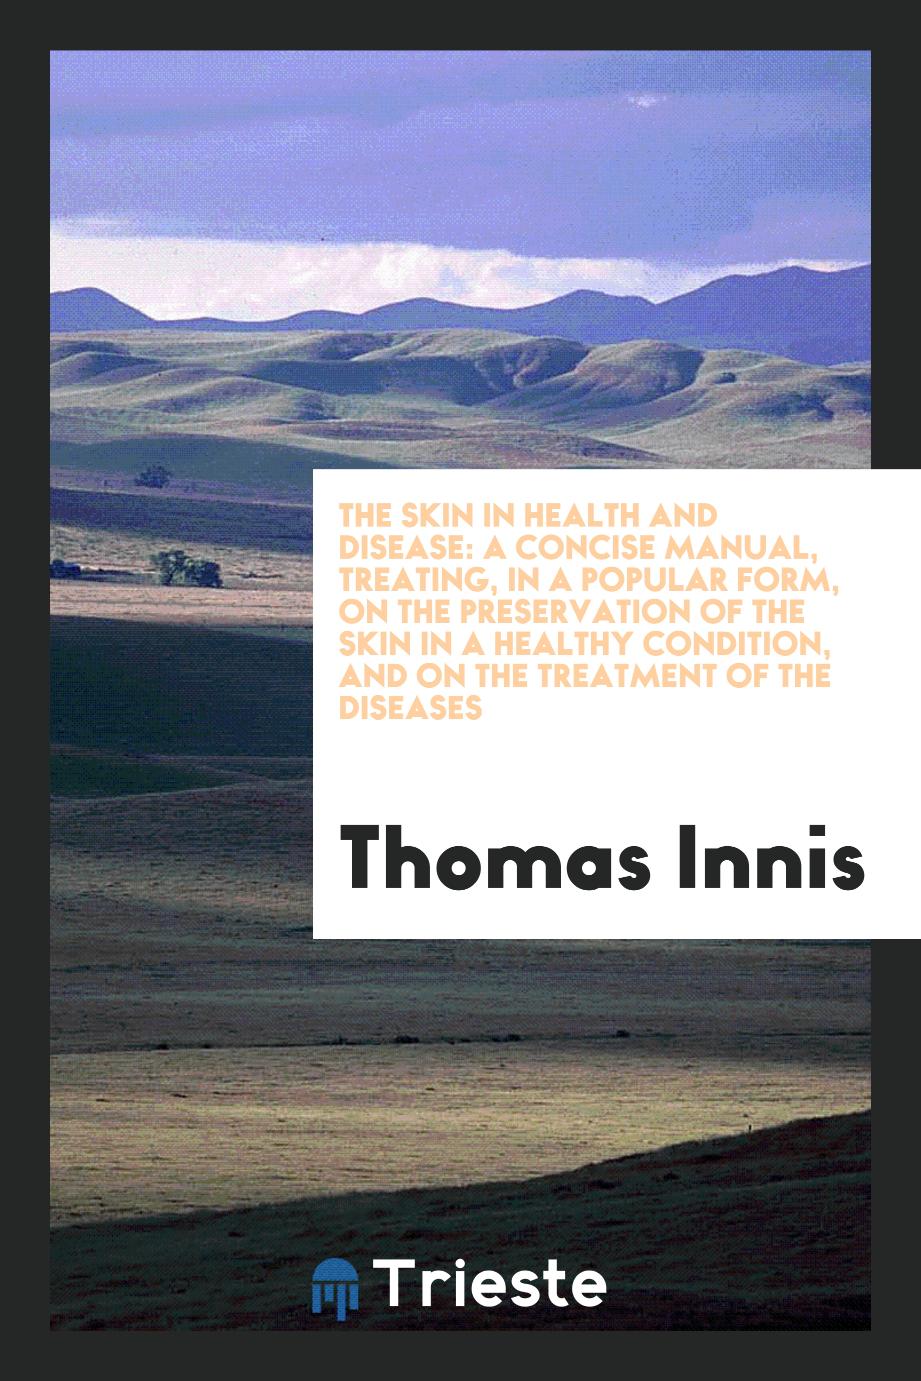 The skin in health and disease: a concise manual, treating, in a popular form, on the preservation of the skin in a healthy condition, and on the treatment of the diseases